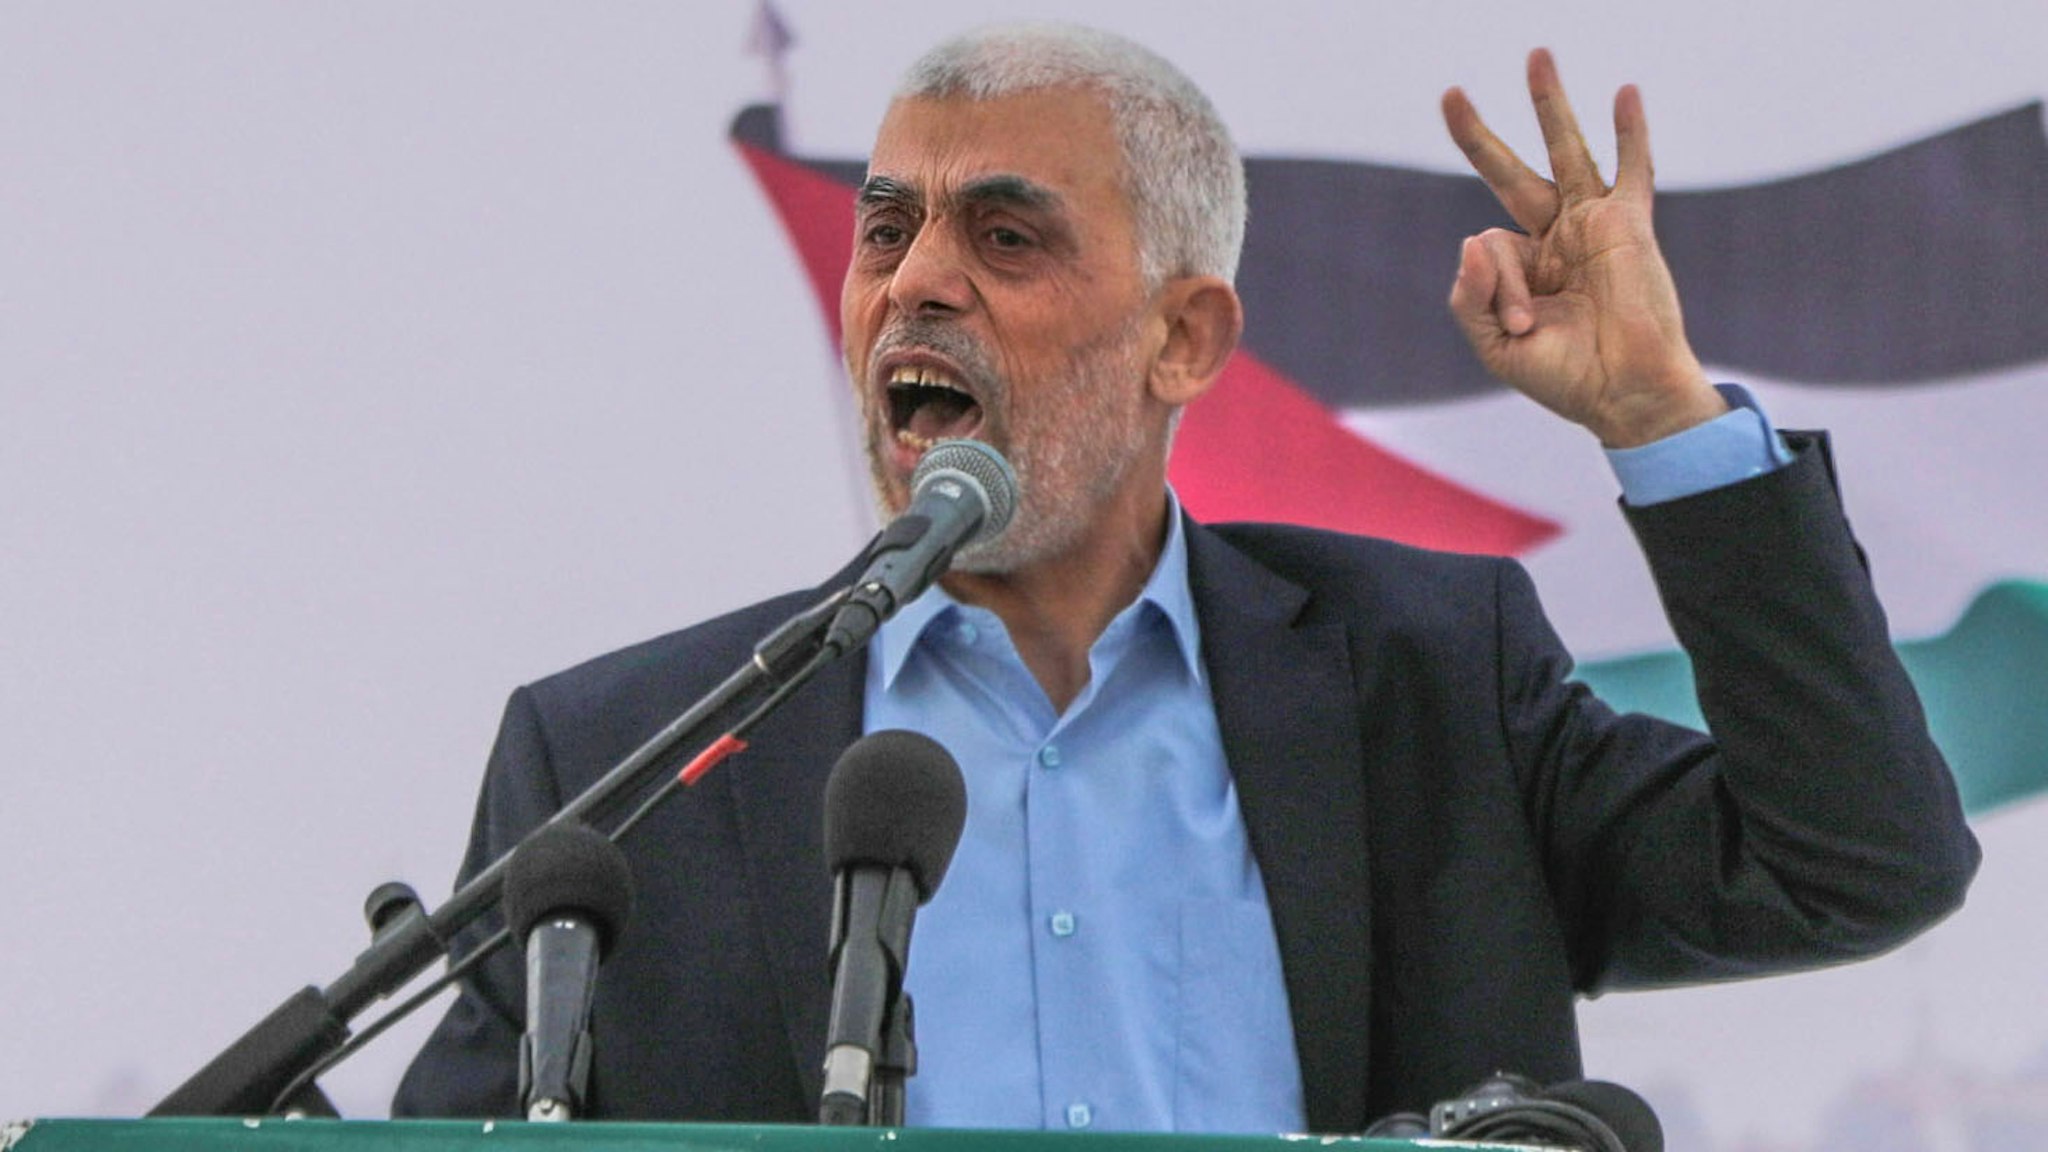 GAZA, PALESTINE - 2023/04/14: Yahya Sinwar, chief of the Palestinian Islamist Hamas movement in Gaza, delivers a speech during a rally marking "Jerusalem Day," or Al-Quds Day. The chief of the Palestinian Islamist Hamas movement in Gaza, Yahya Sinwar delivered a historic address to the Palestinian people of Gaza, telling them to stick up to the fighting against Israel in a speech that reflected his country's support for the territory's ruling Hamas militant group. Al-Quds (Jerusalem) Day is a commemoration day in support of the Palestinian people held annually on the last Friday of the Muslim fasting month of Ramadan by an initiative started by the late founder of the Islamic Republic in Iran.